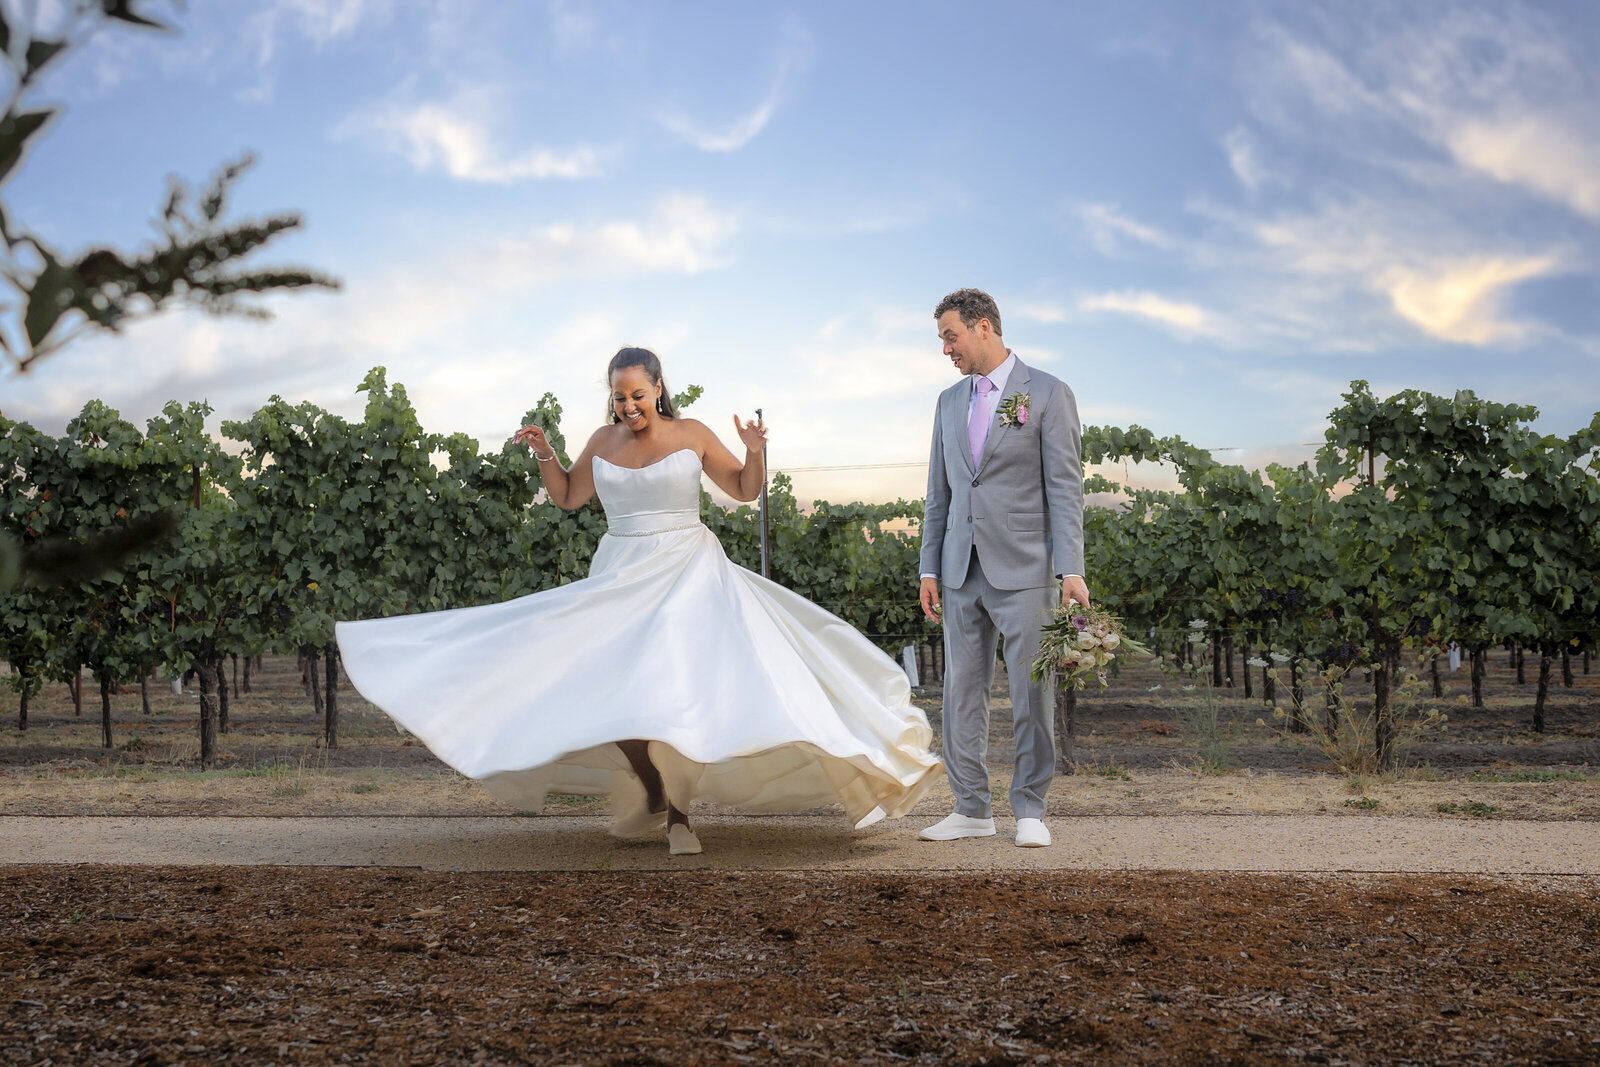 Bride twirls in her wedding dress with the groom looking at her in front of a vineyard, captured beautifully by Philippe Studio Pro, a Sacramento wedding photographer.